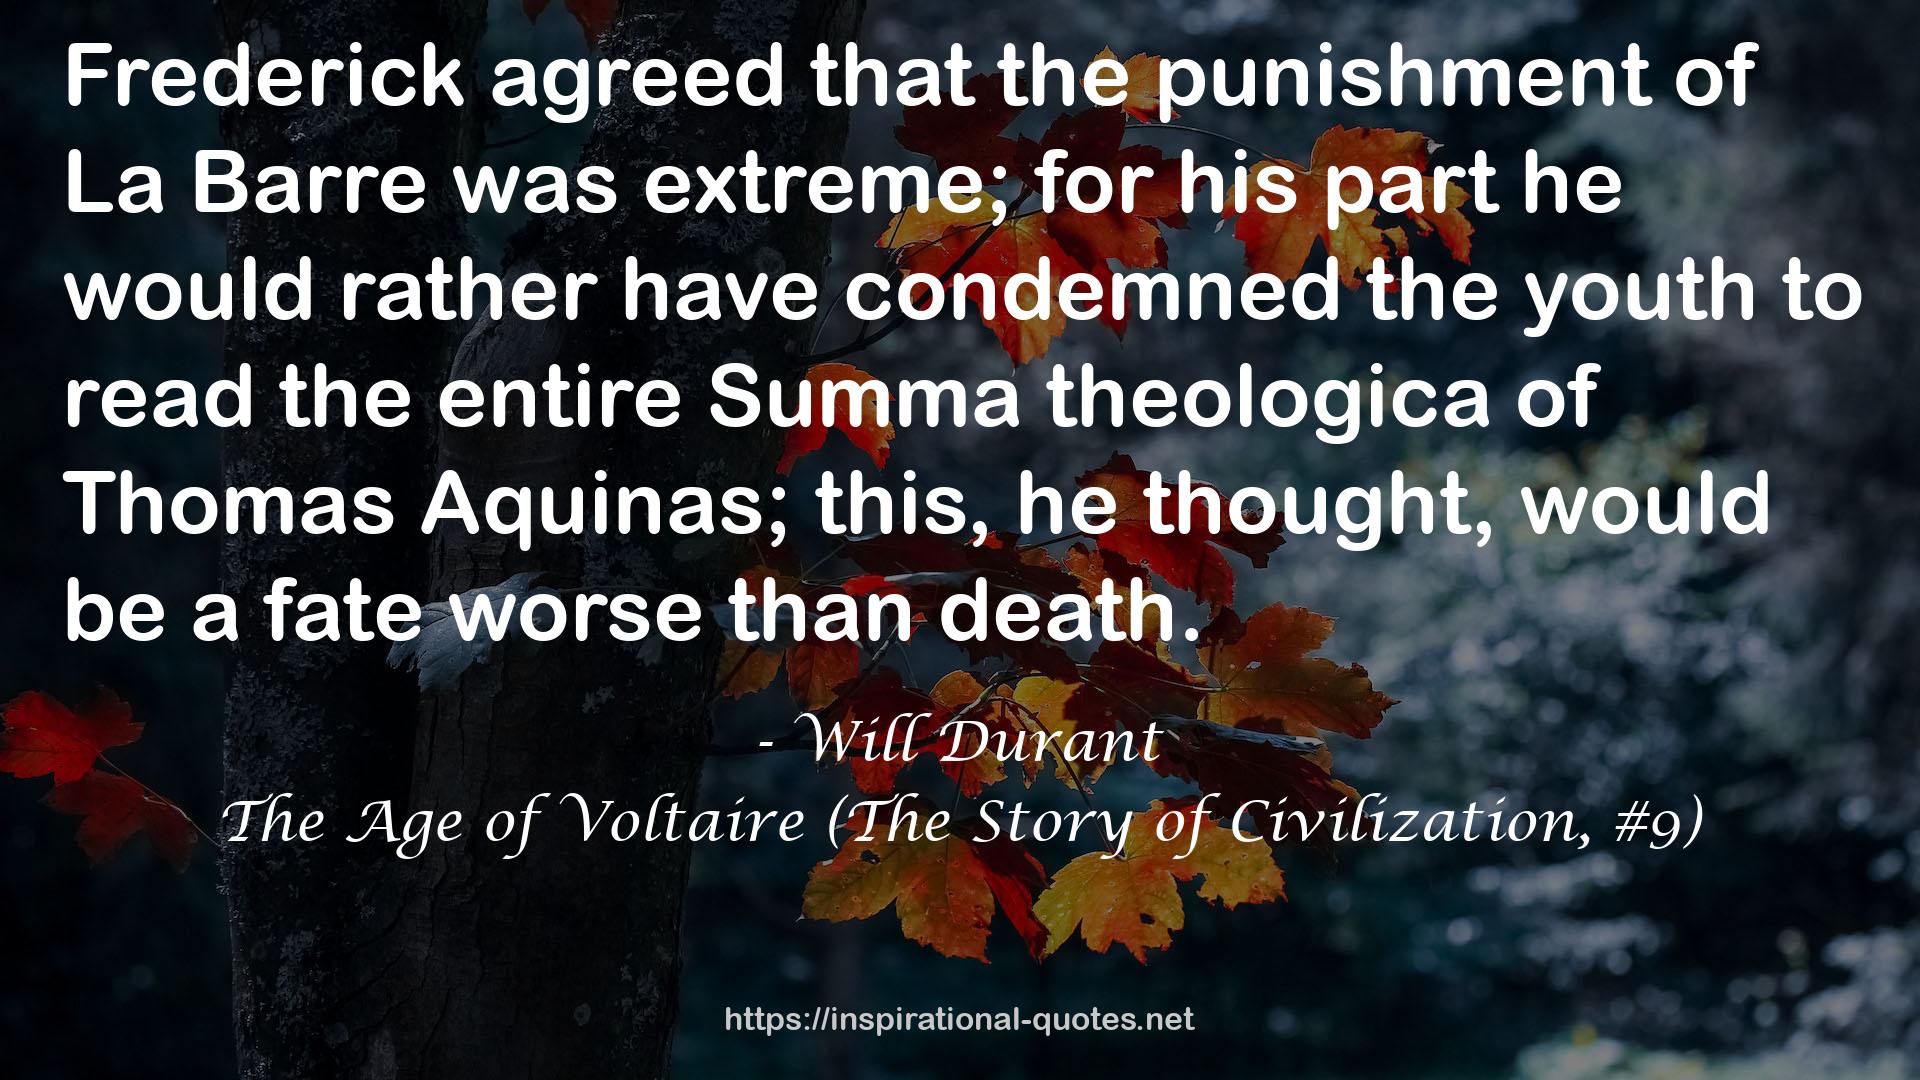 The Age of Voltaire (The Story of Civilization, #9) QUOTES